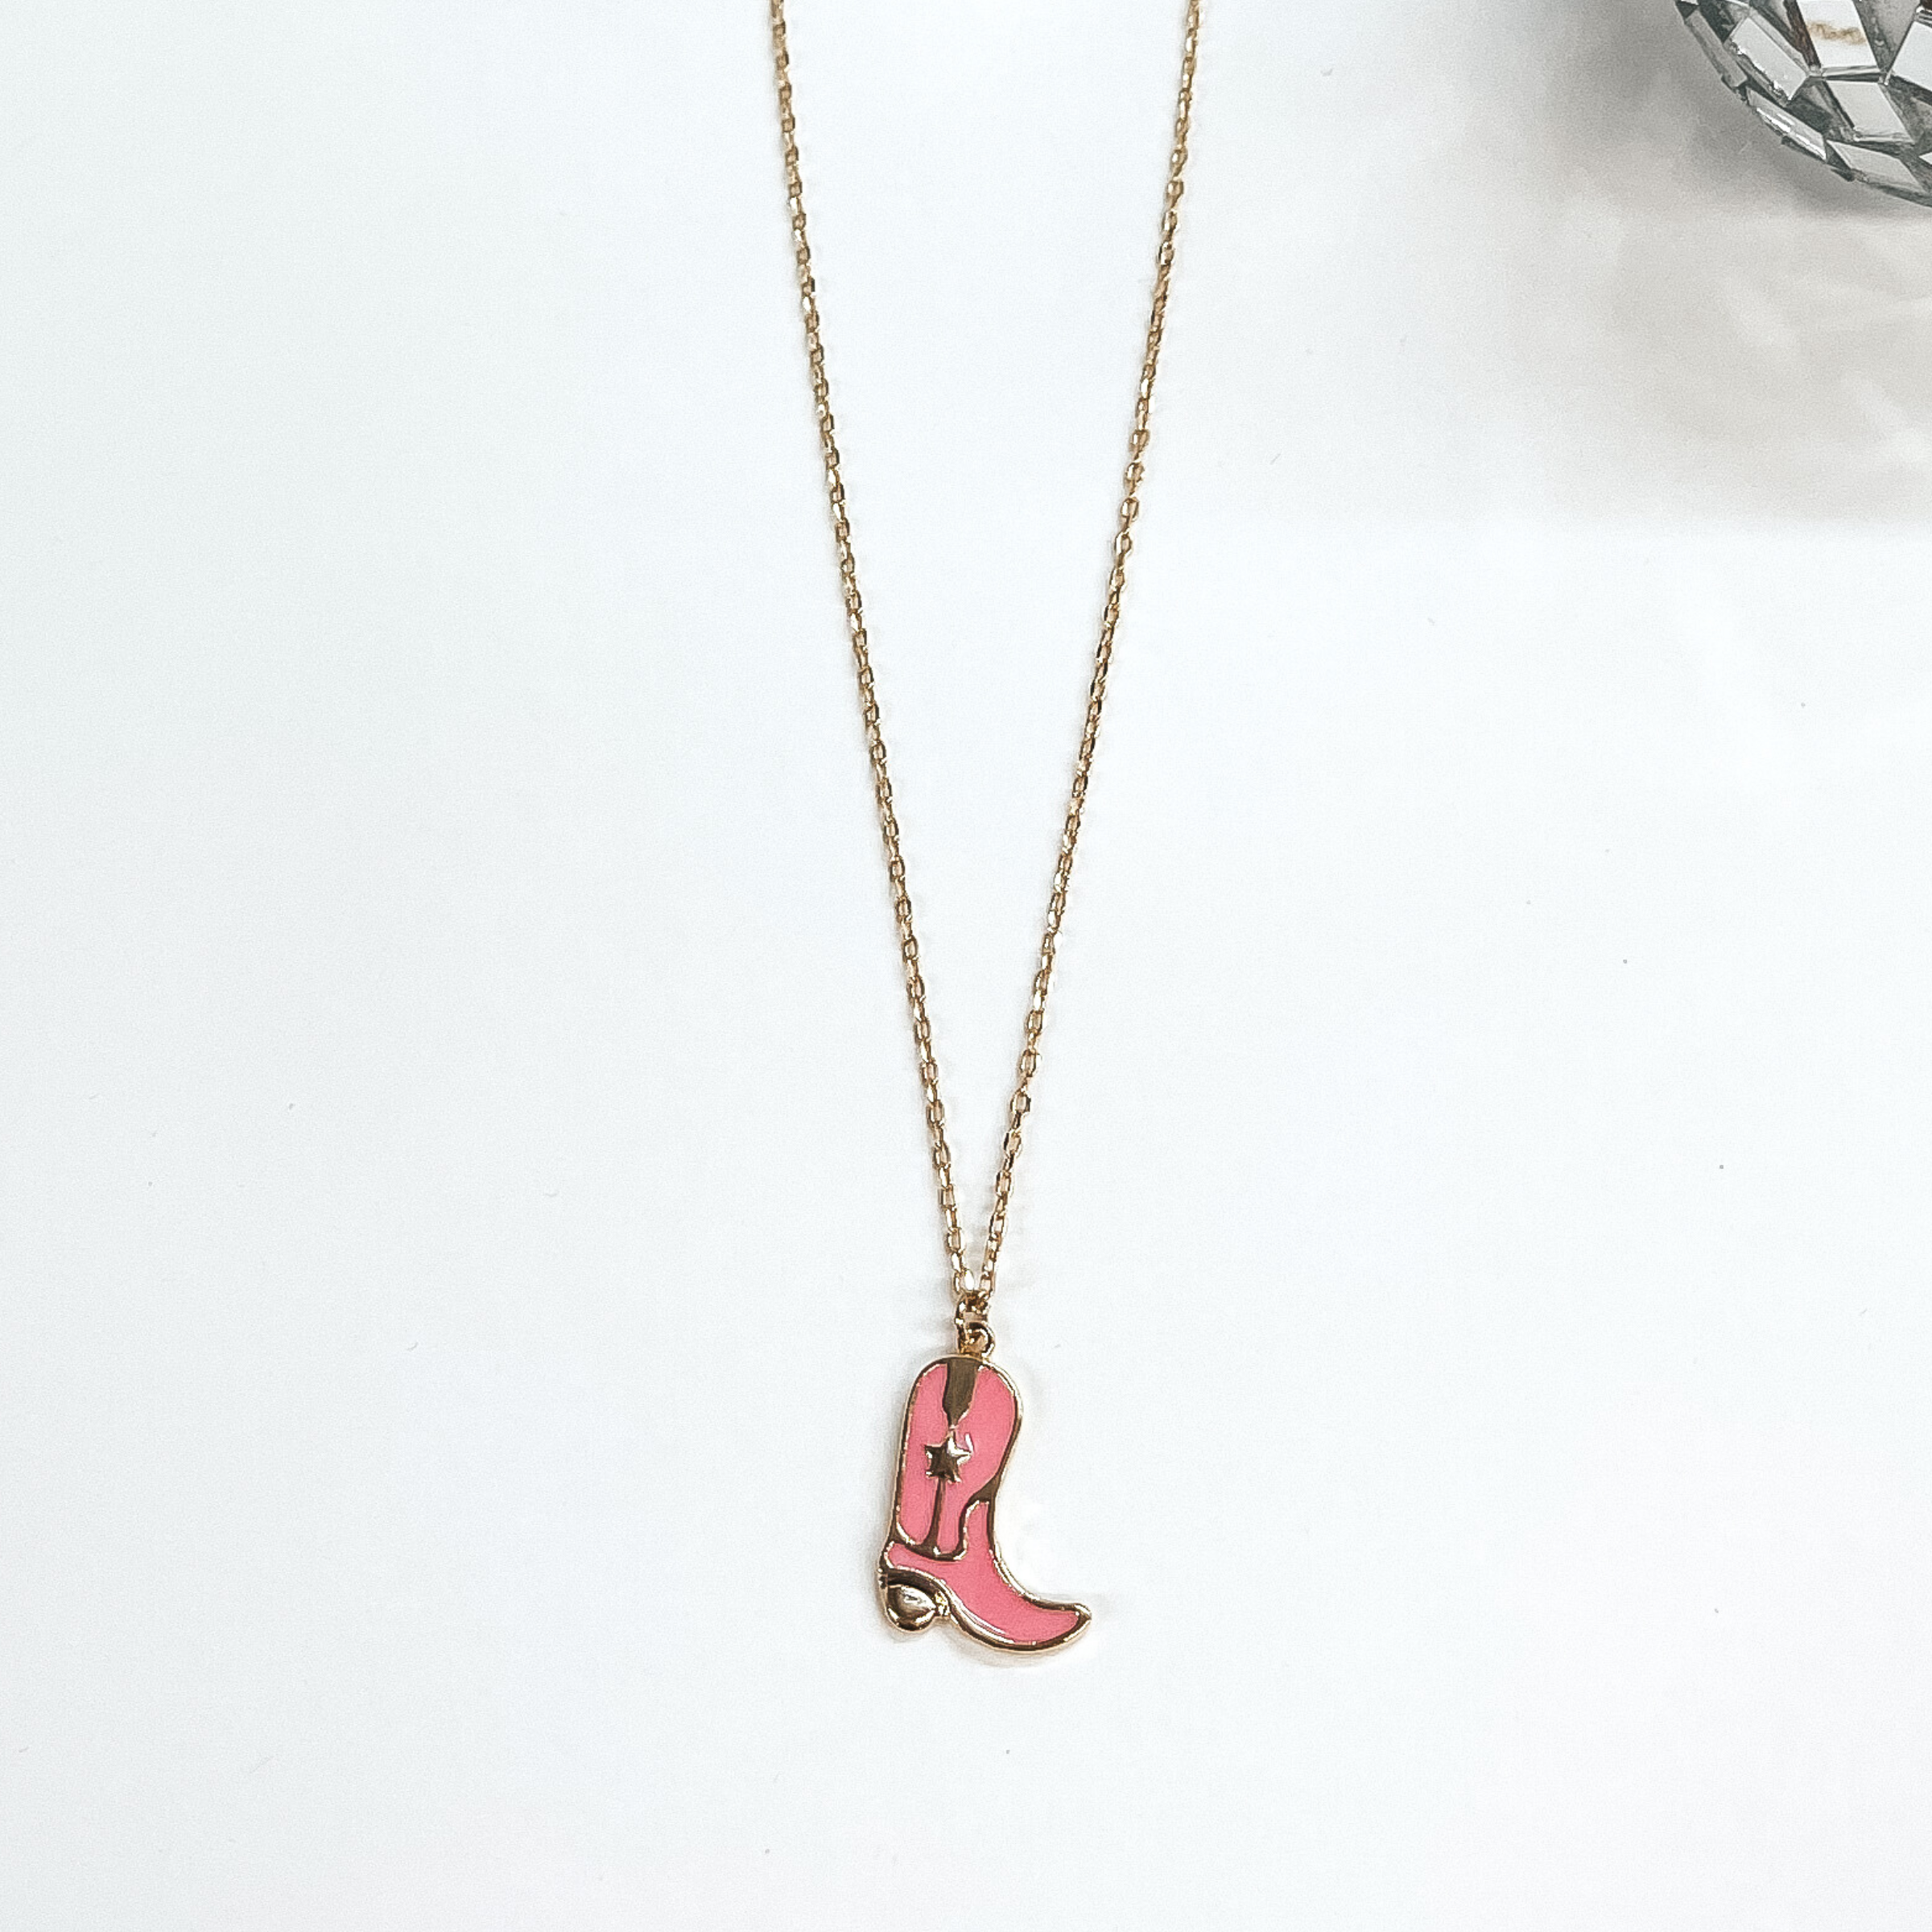 Take Me to Nashville Gold Necklace with Boot Pendant in Pink - Giddy Up Glamour Boutique